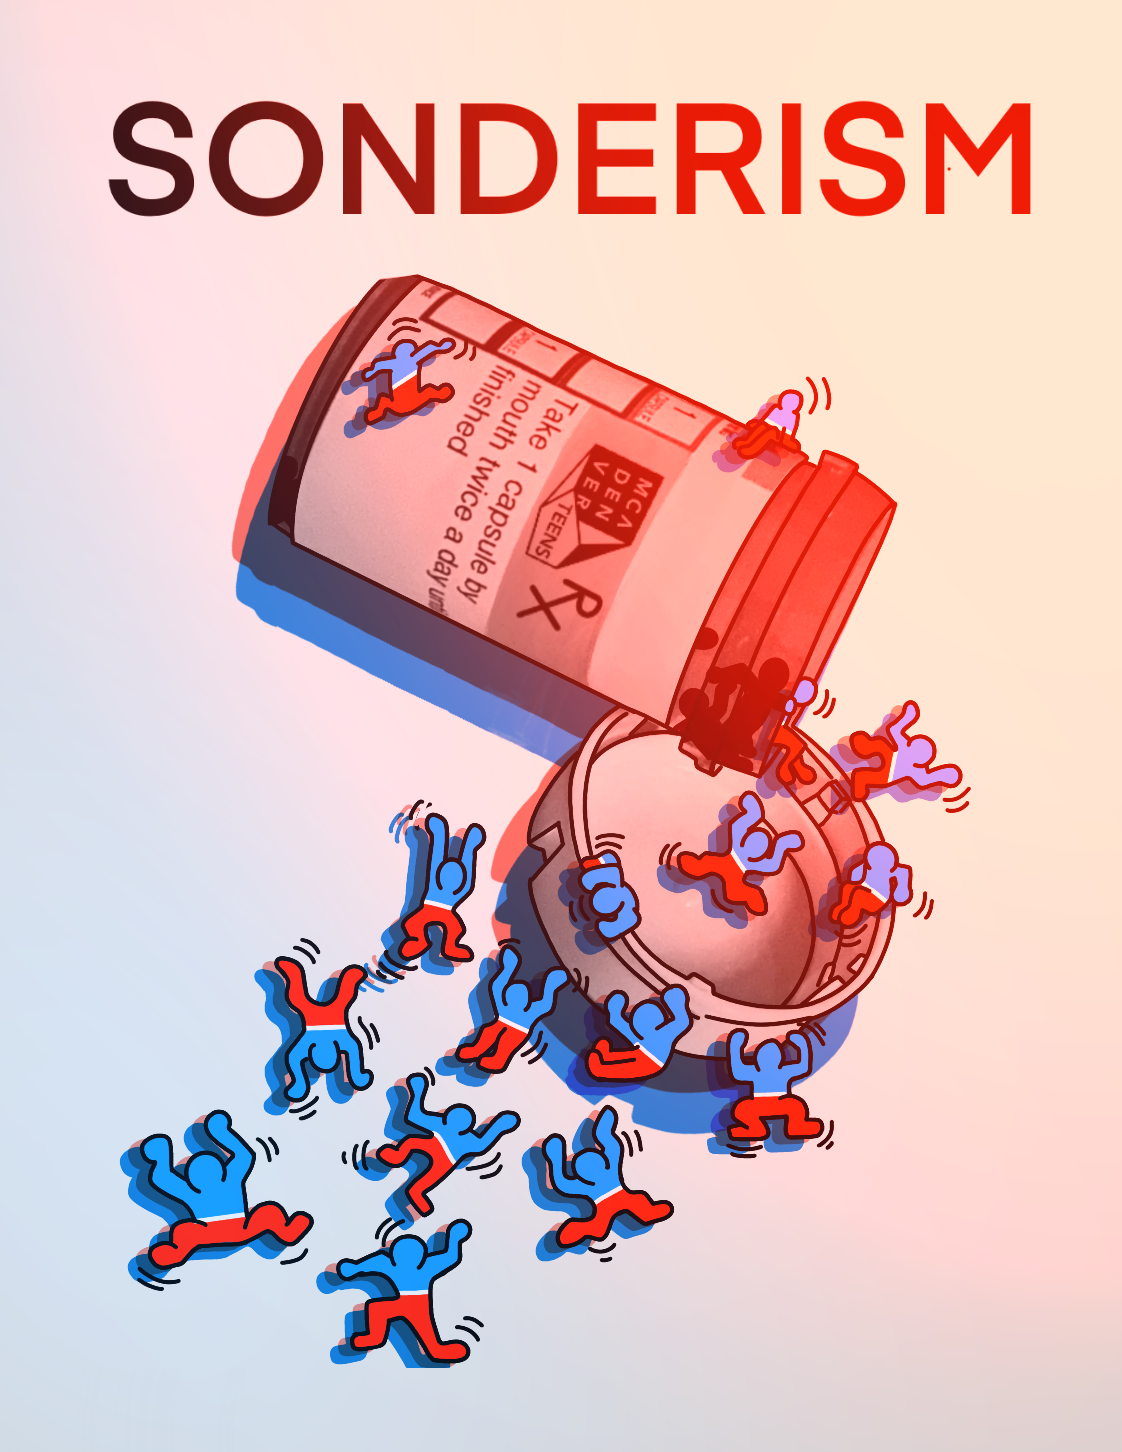 Artwork of blue and red people in the style of Keith Haring spill out of a prescription bottle. The word SONDERISM acts as a title in large red letters.